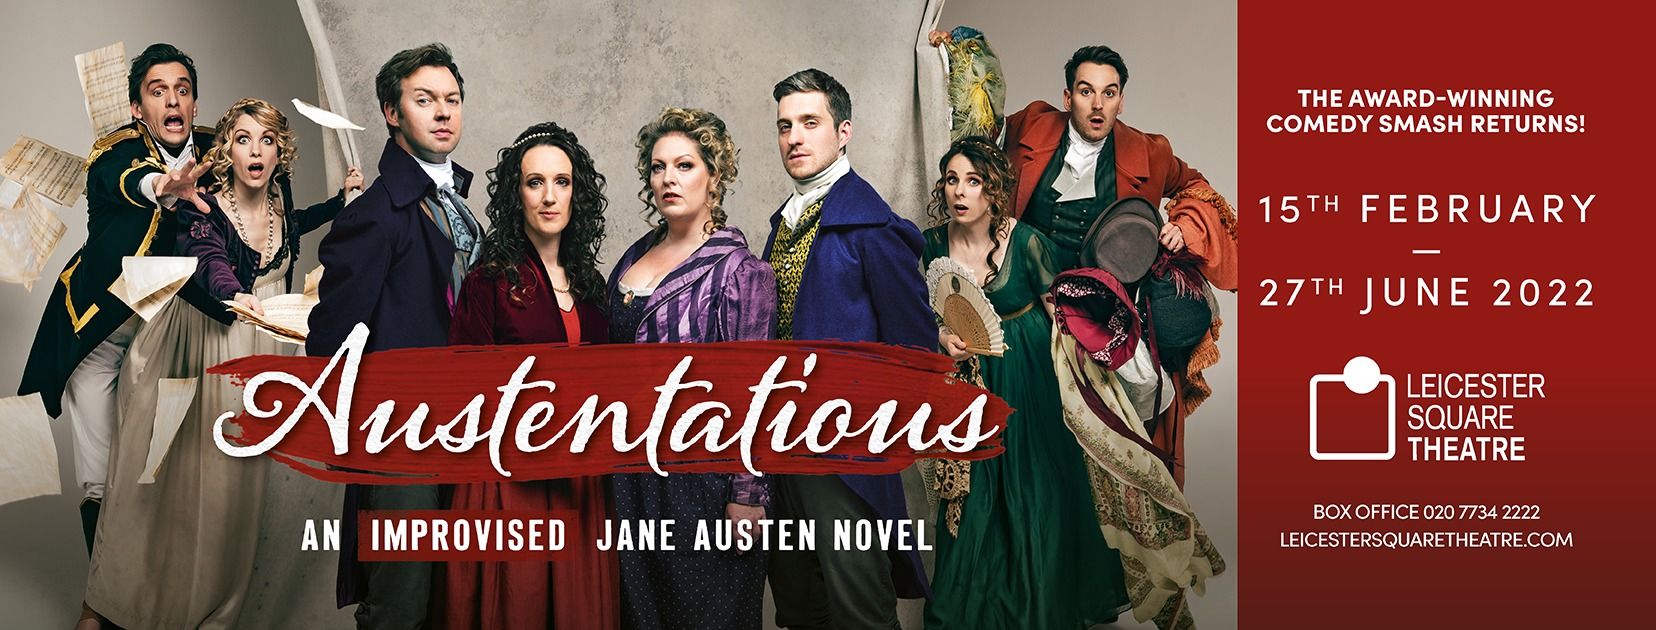 Two shows are never the same when performers come out on stage with period costume and live musical. Get Austentatious tickets.